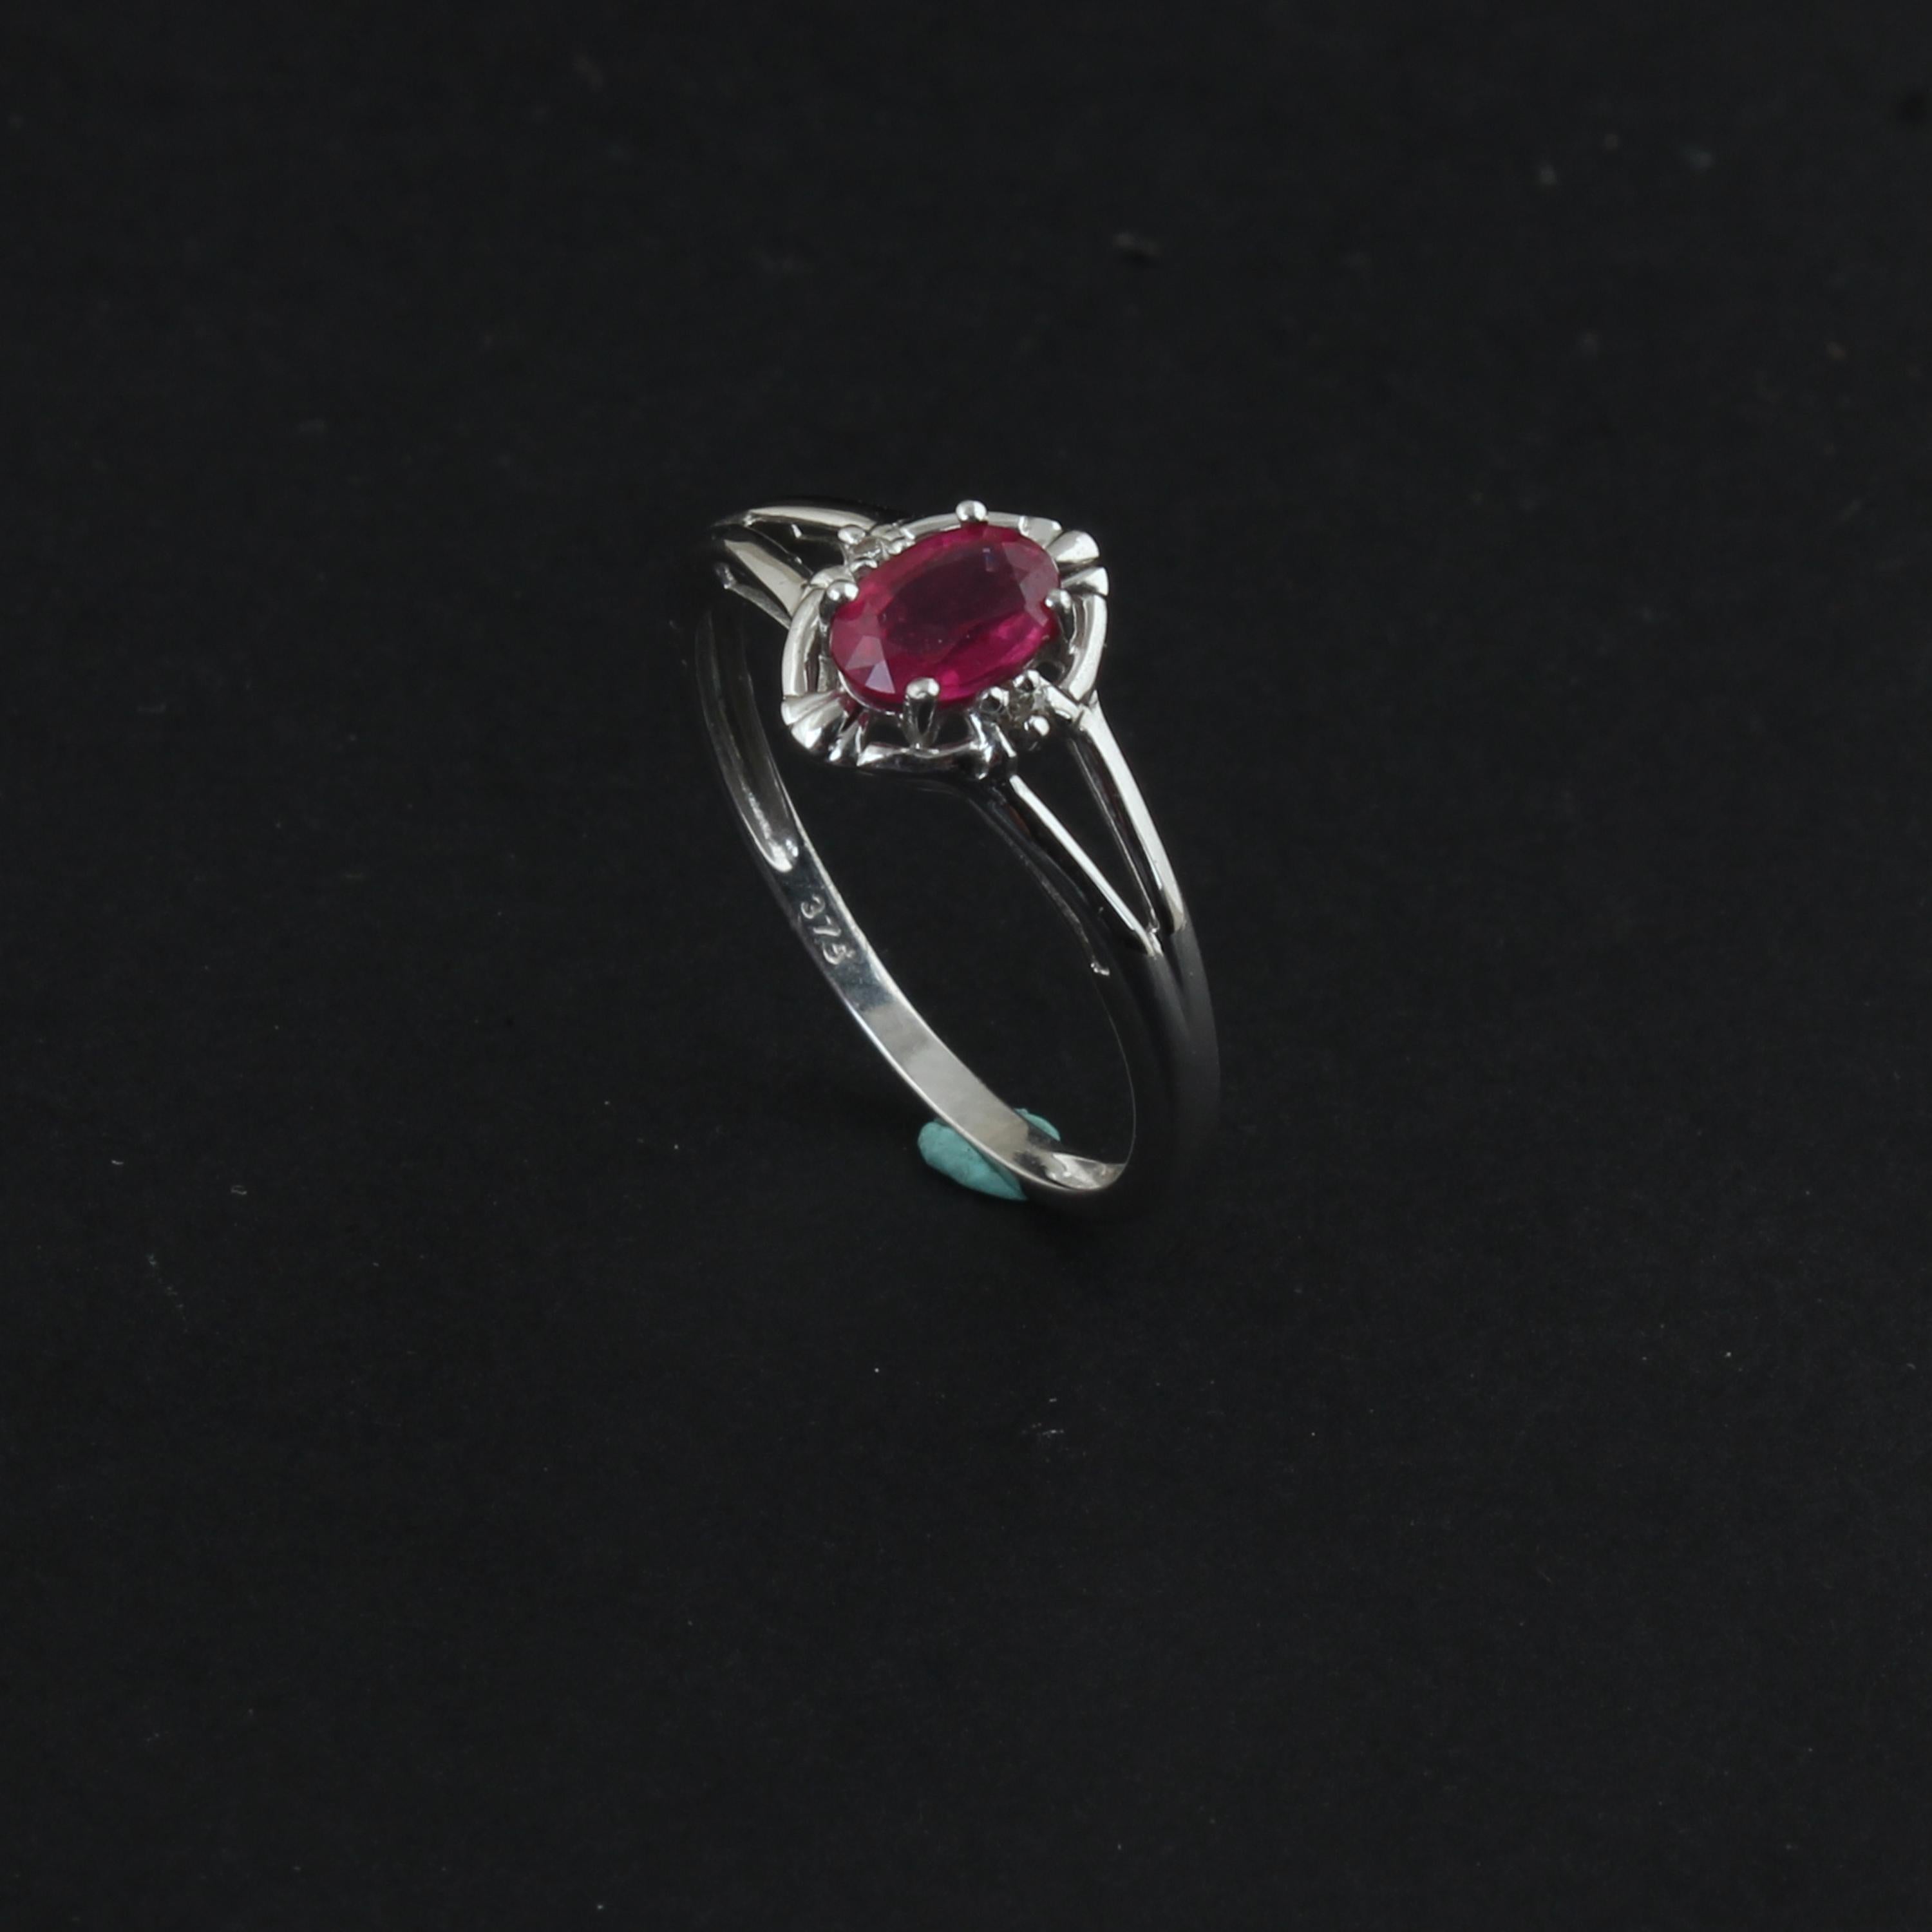 For Sale:  Oval Shape Ruby Gemstone Ring Diamond Pave Solid 9 Karat White Gold Fine Jewelry 4